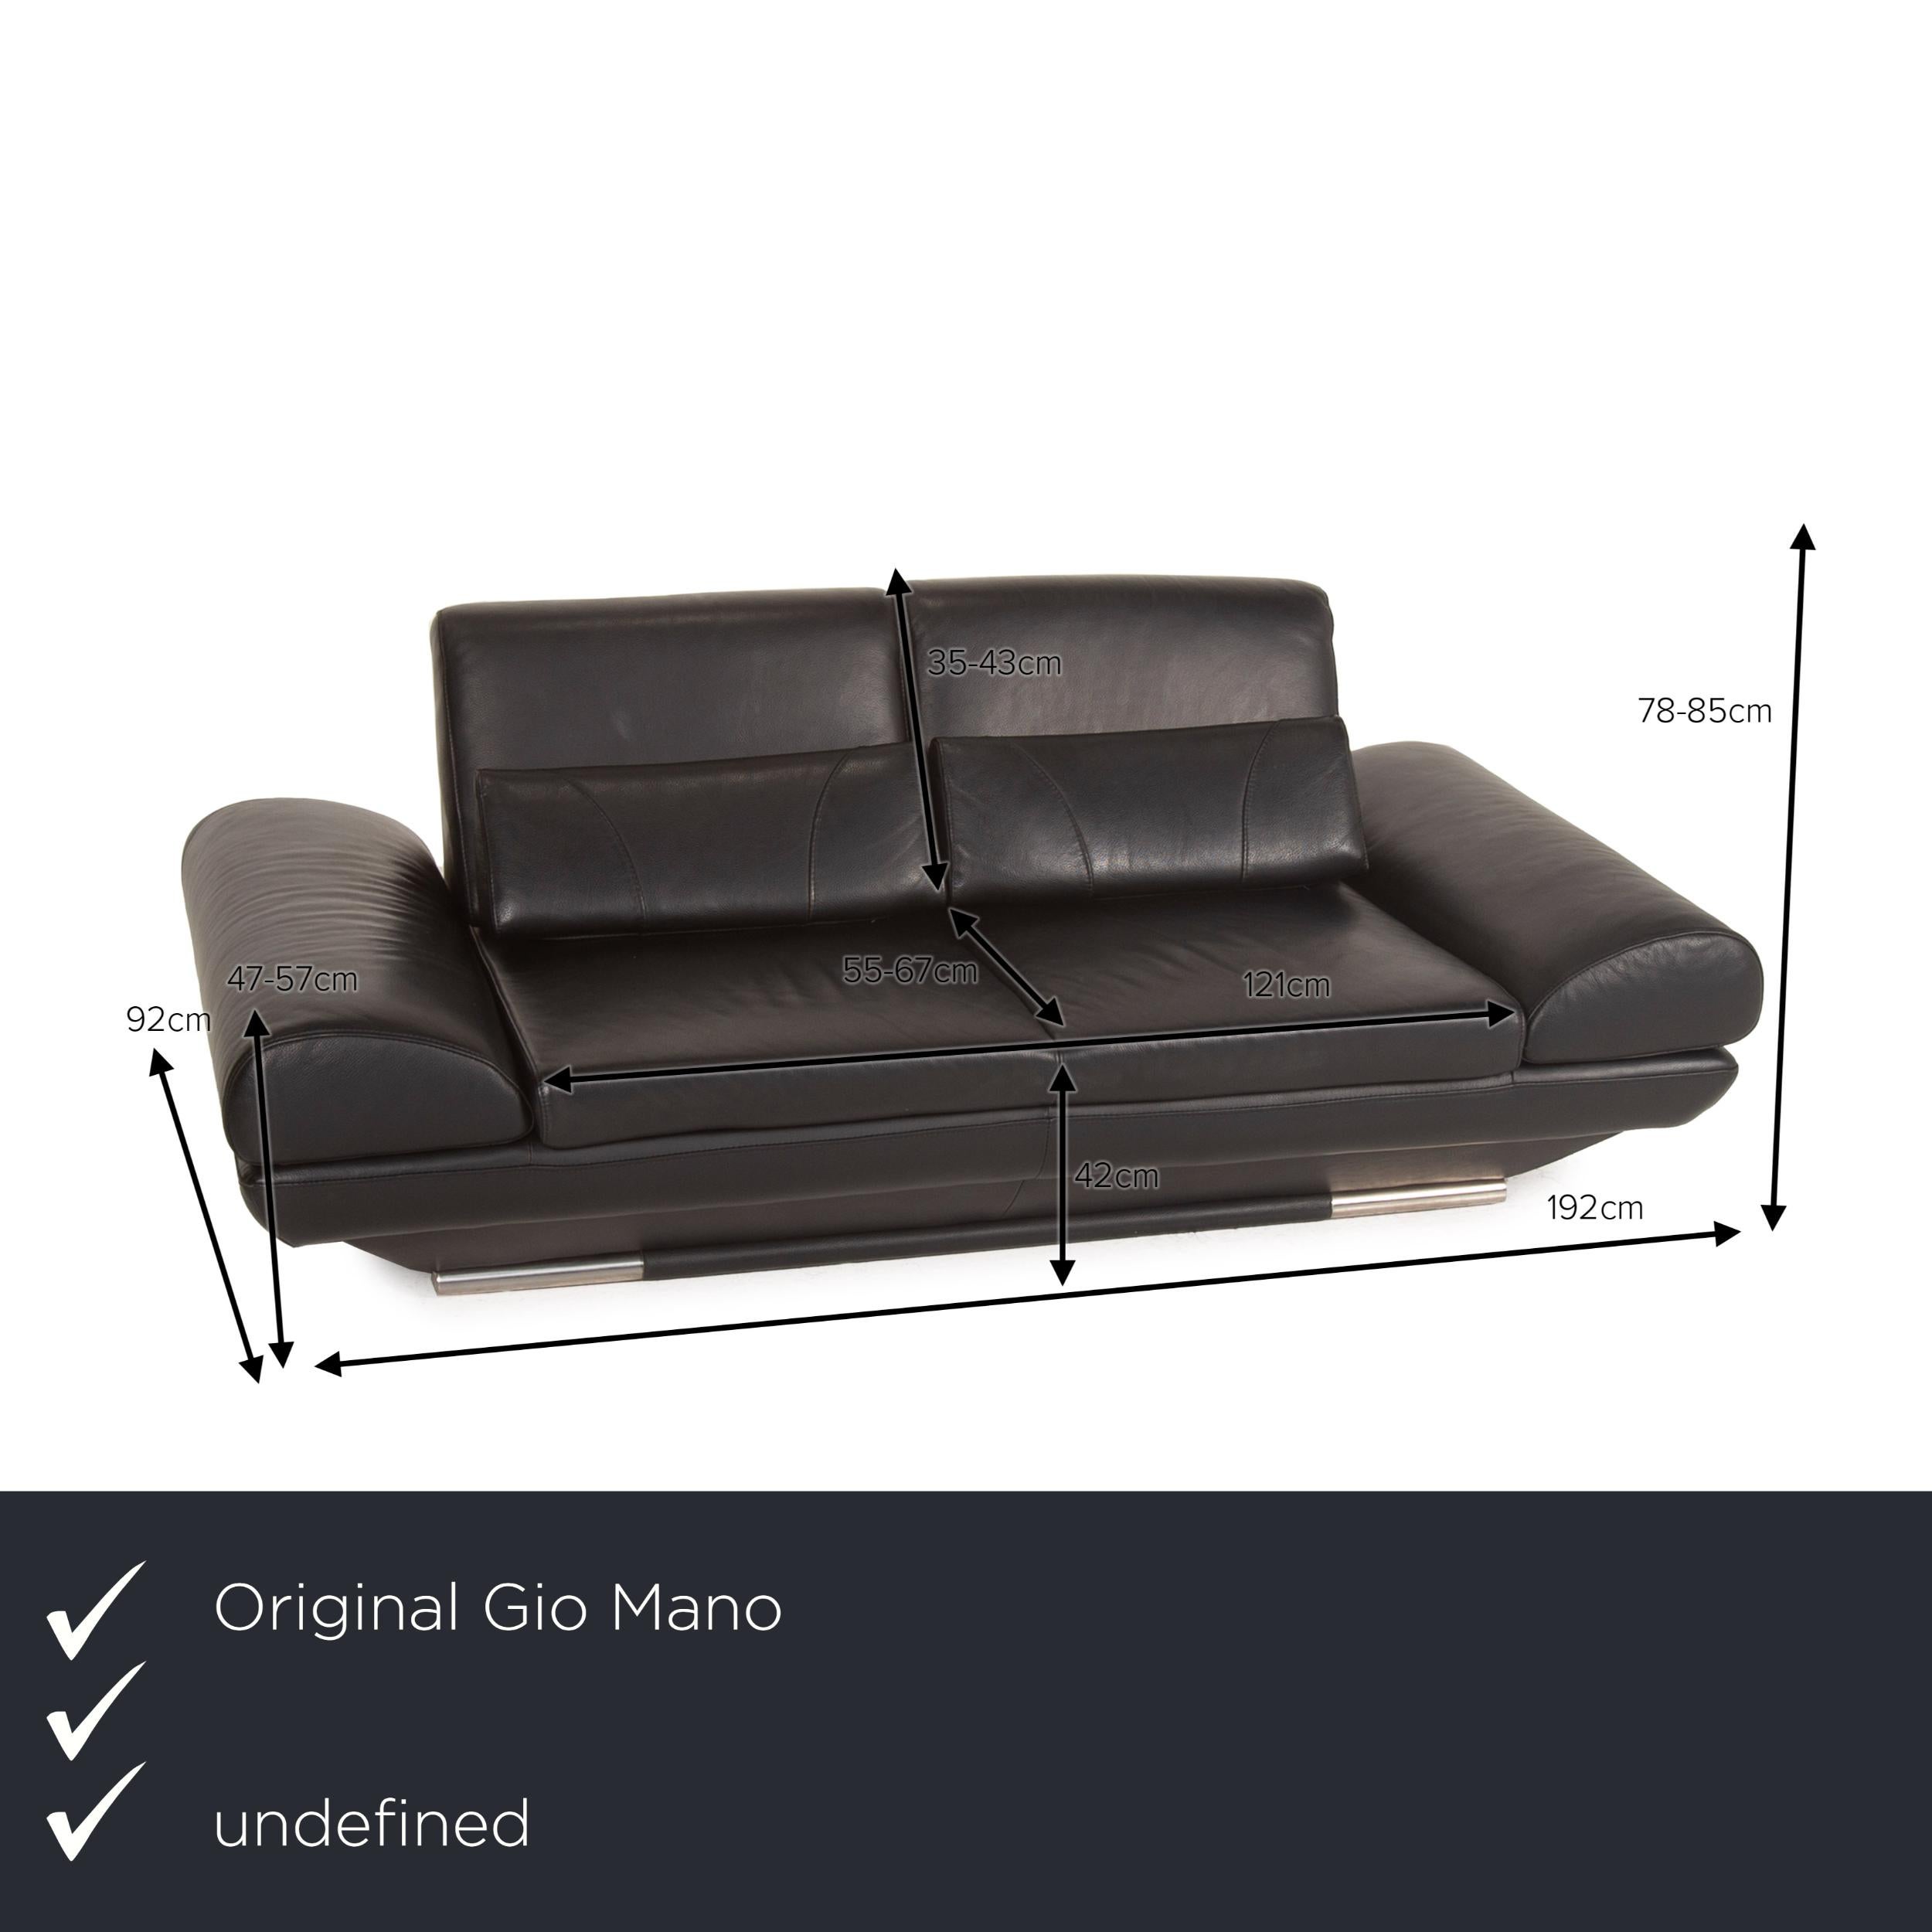 We present to you a Gio Mano leather sofa black two-seater function.
 

 Product measurements in centimeters:
 

Depth: 92
Width: 192
Height: 78
Seat height: 42
Rest height: 47
Seat depth: 55
Seat width: 121
Back height: 35.

 